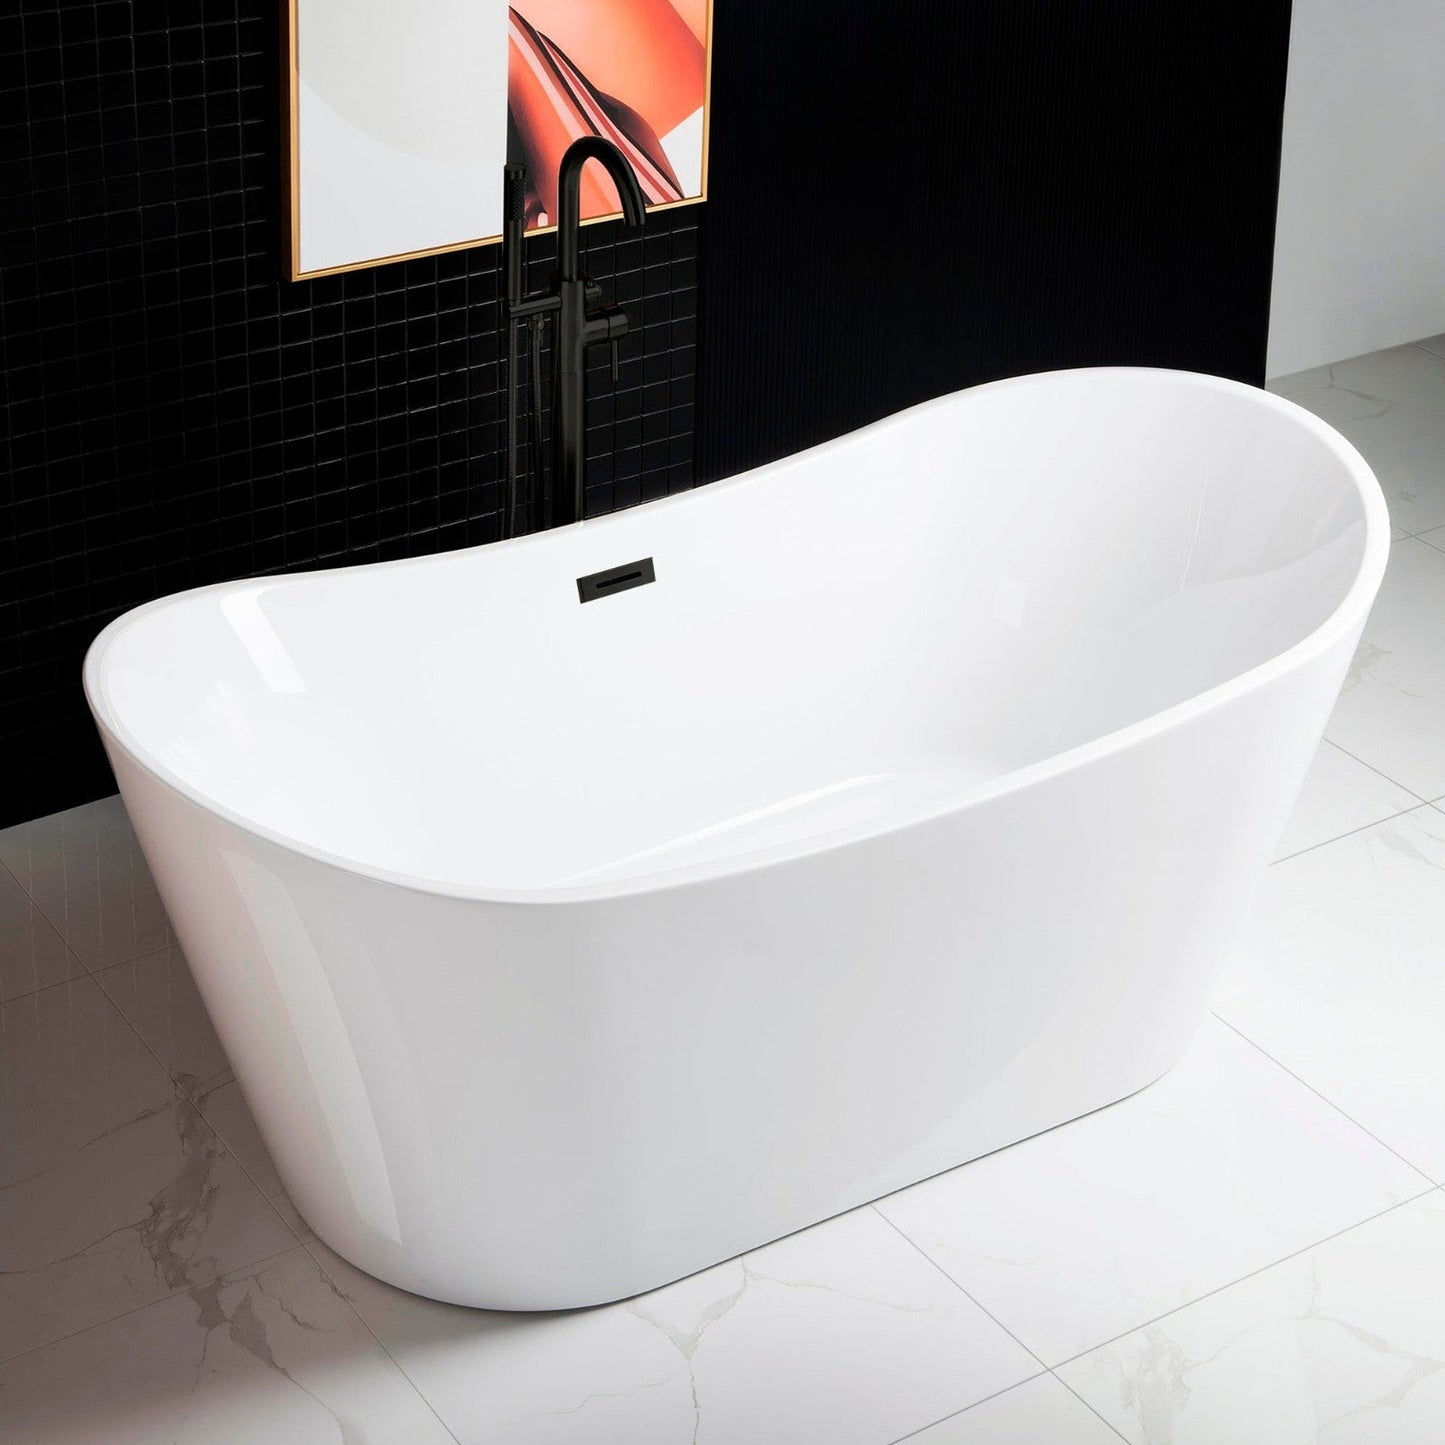 WoodBridge B0010 67" White Acrylic Freestanding Contemporary Soaking Bathtub With Matte Black Drain, Overflow, F0009 Tub Filler and Caddy Tray